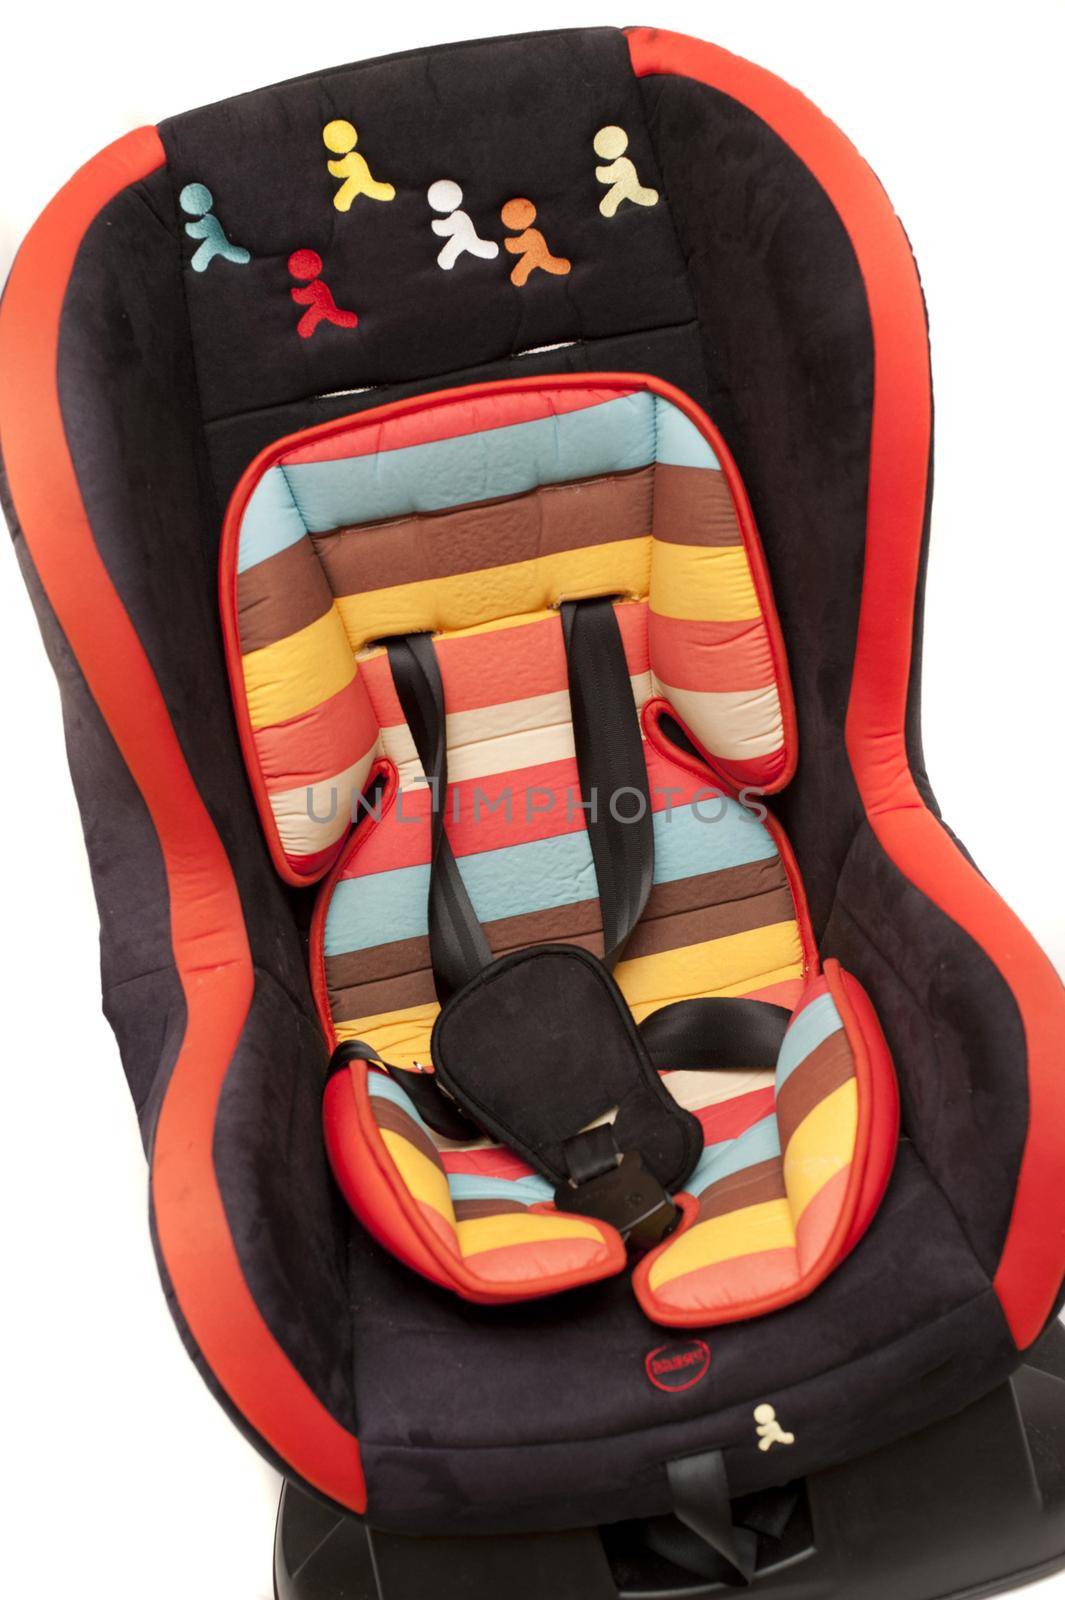 A childs car safety seat